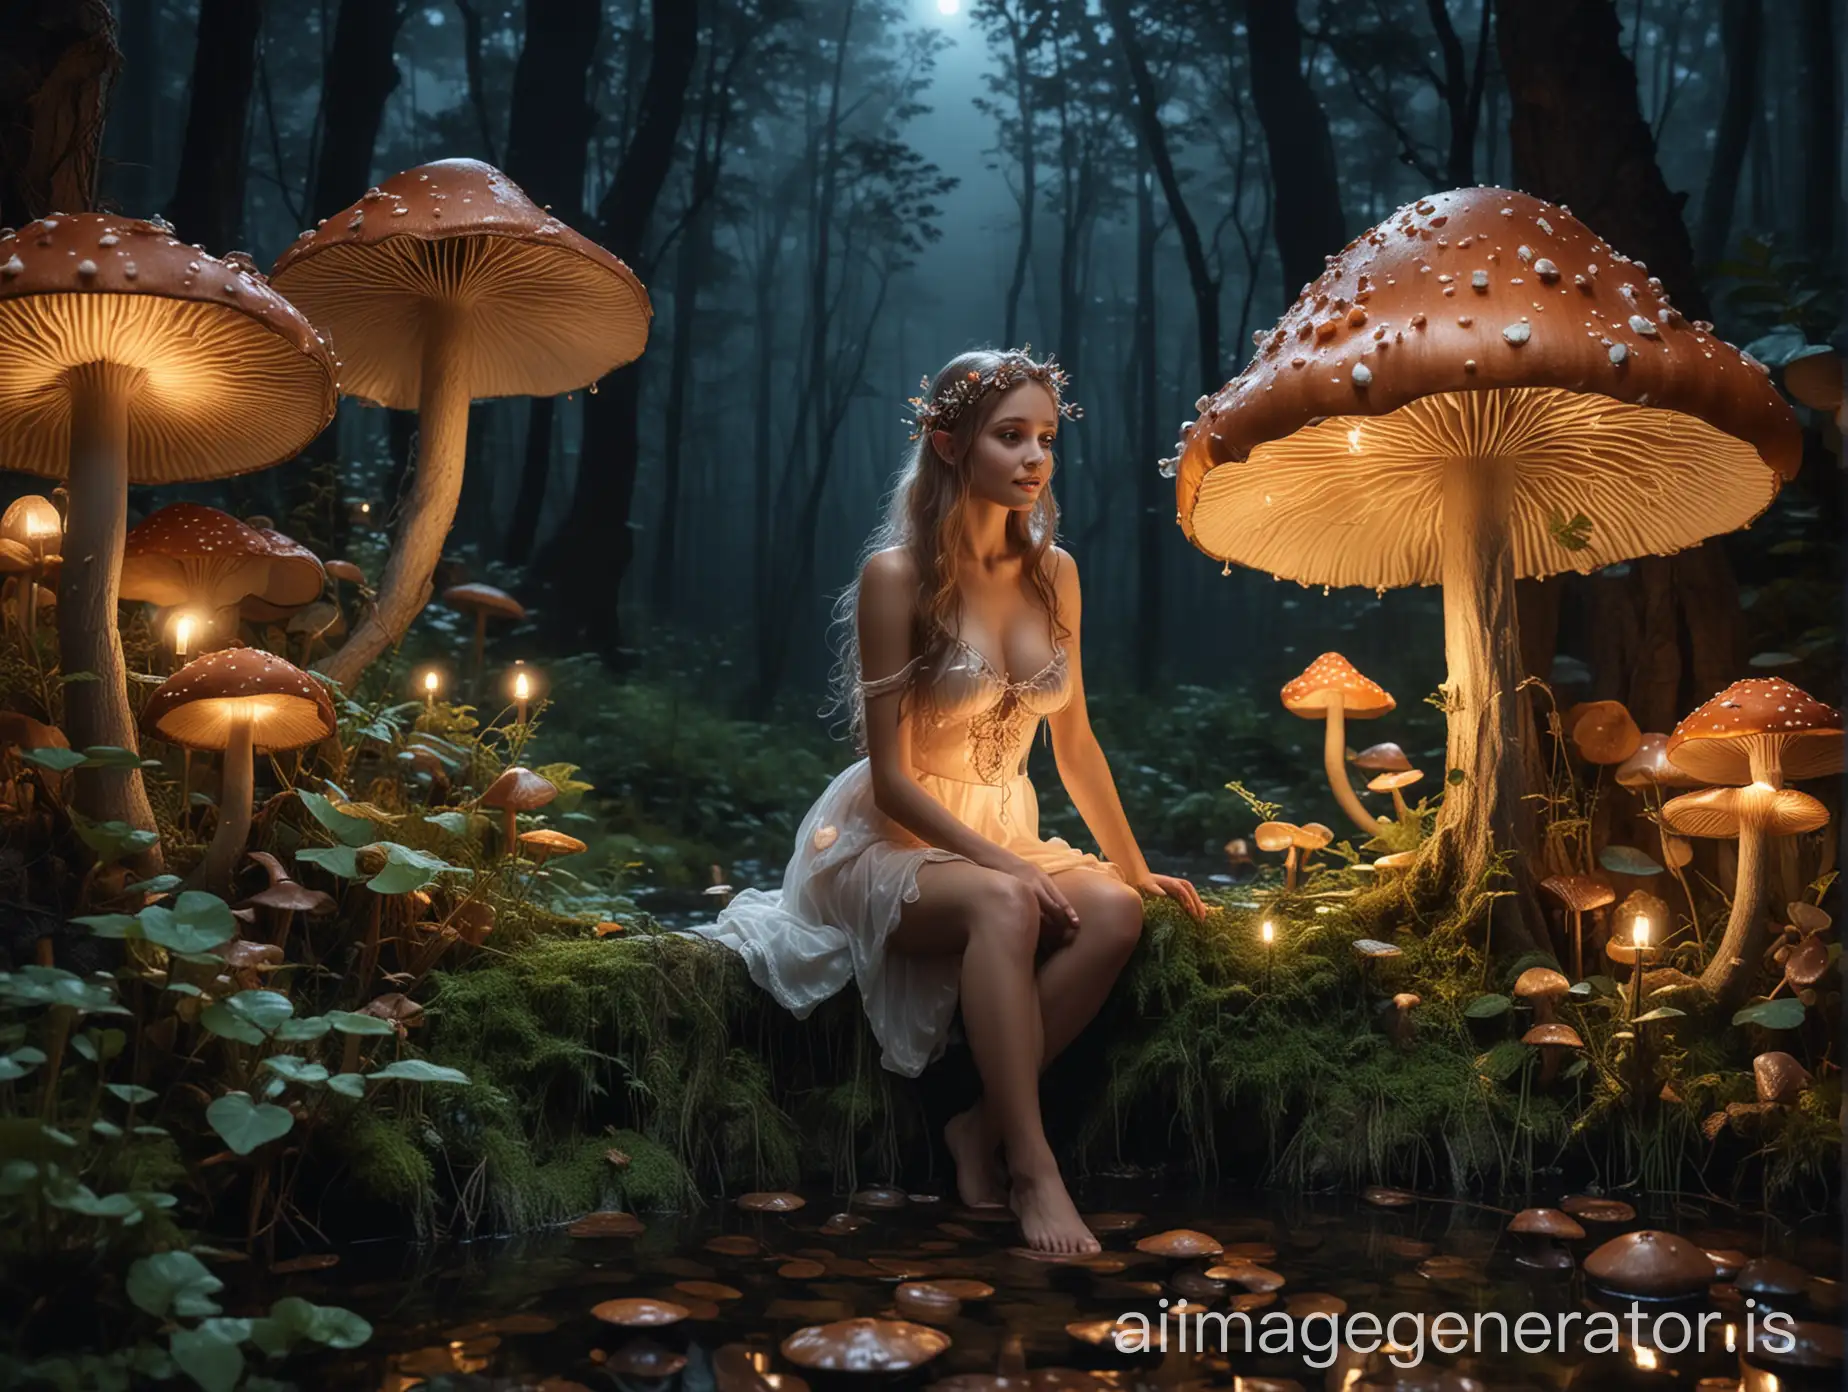 Enchanting-Fairy-Bathing-in-Mystical-Mushroom-Forest-at-Night-with-Lamp